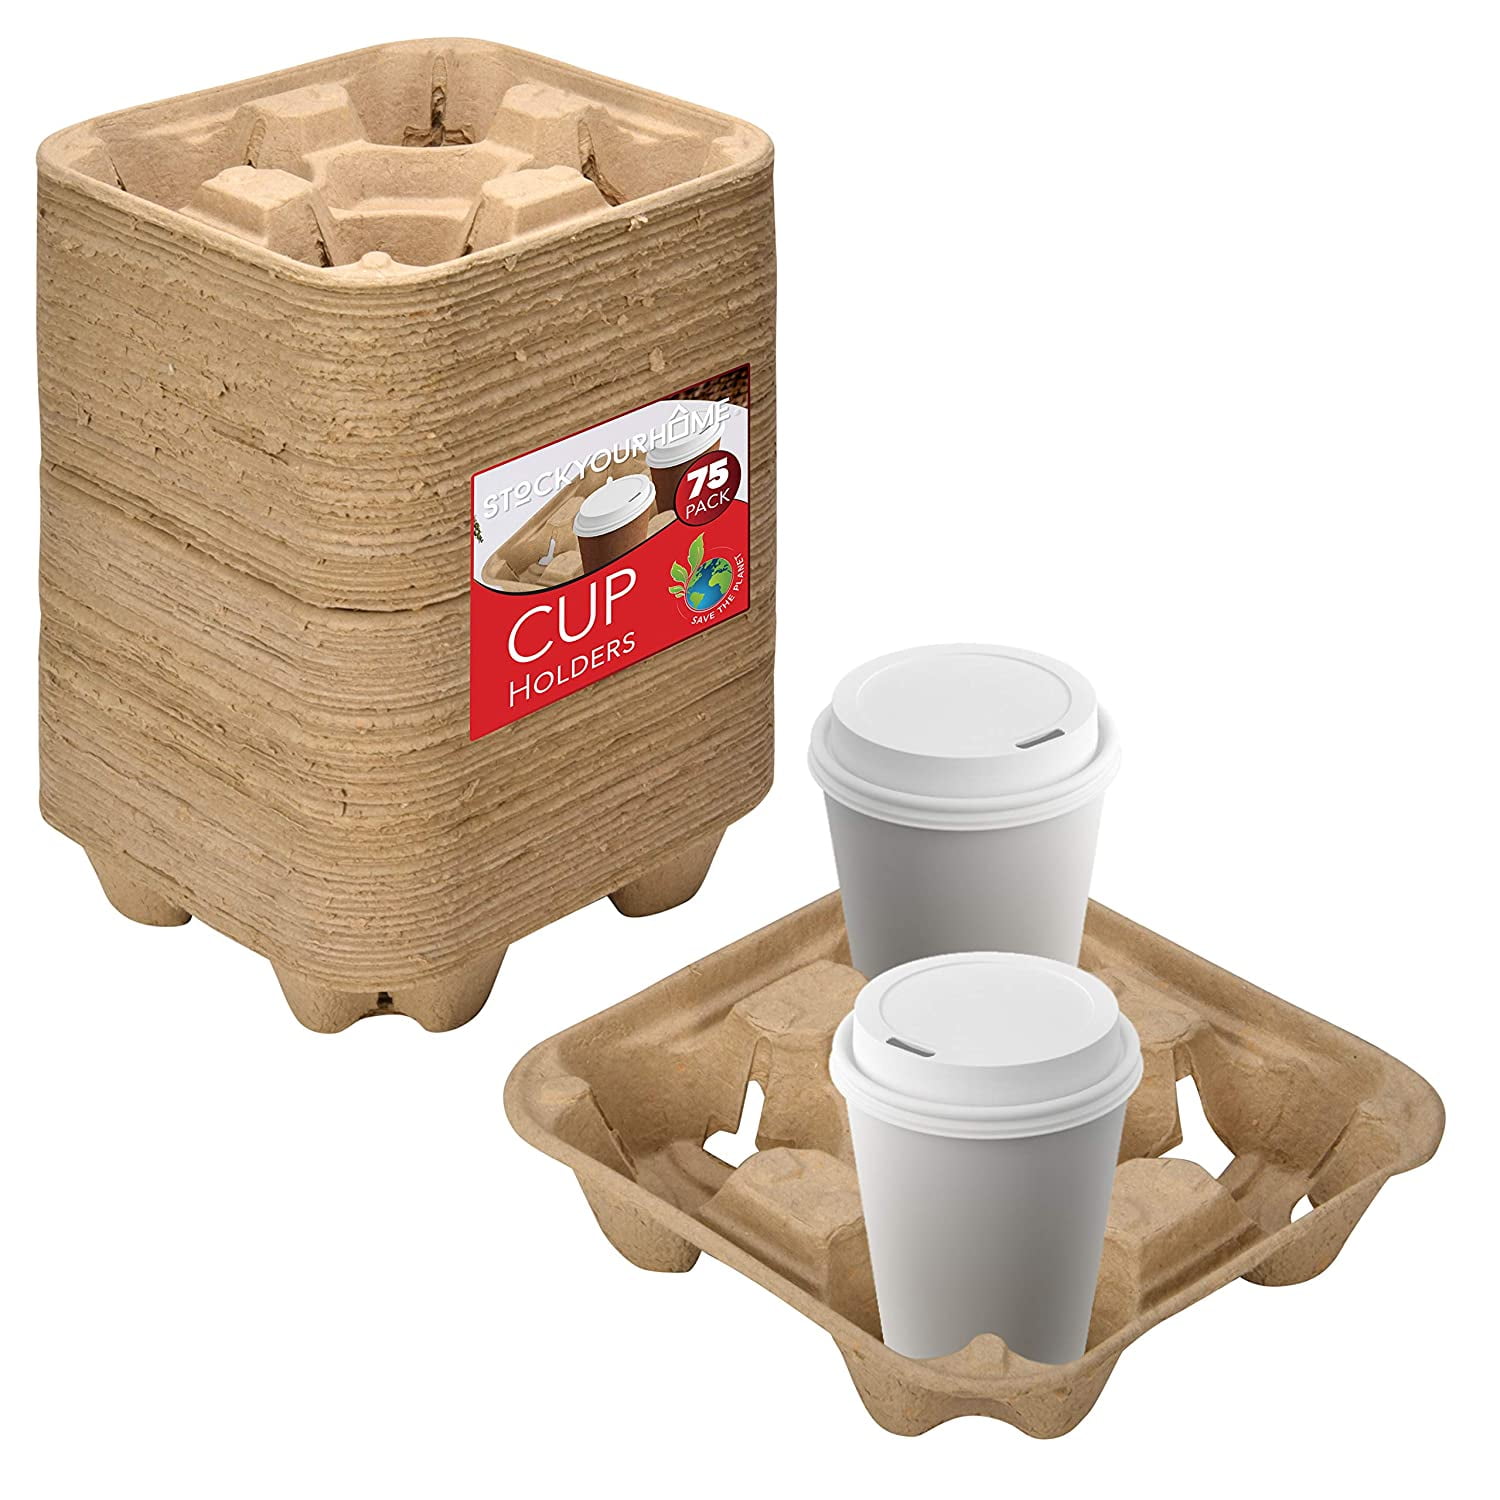 90 x Disposable 4 Cup Carriers Cup Holders Cup Carry Trays 